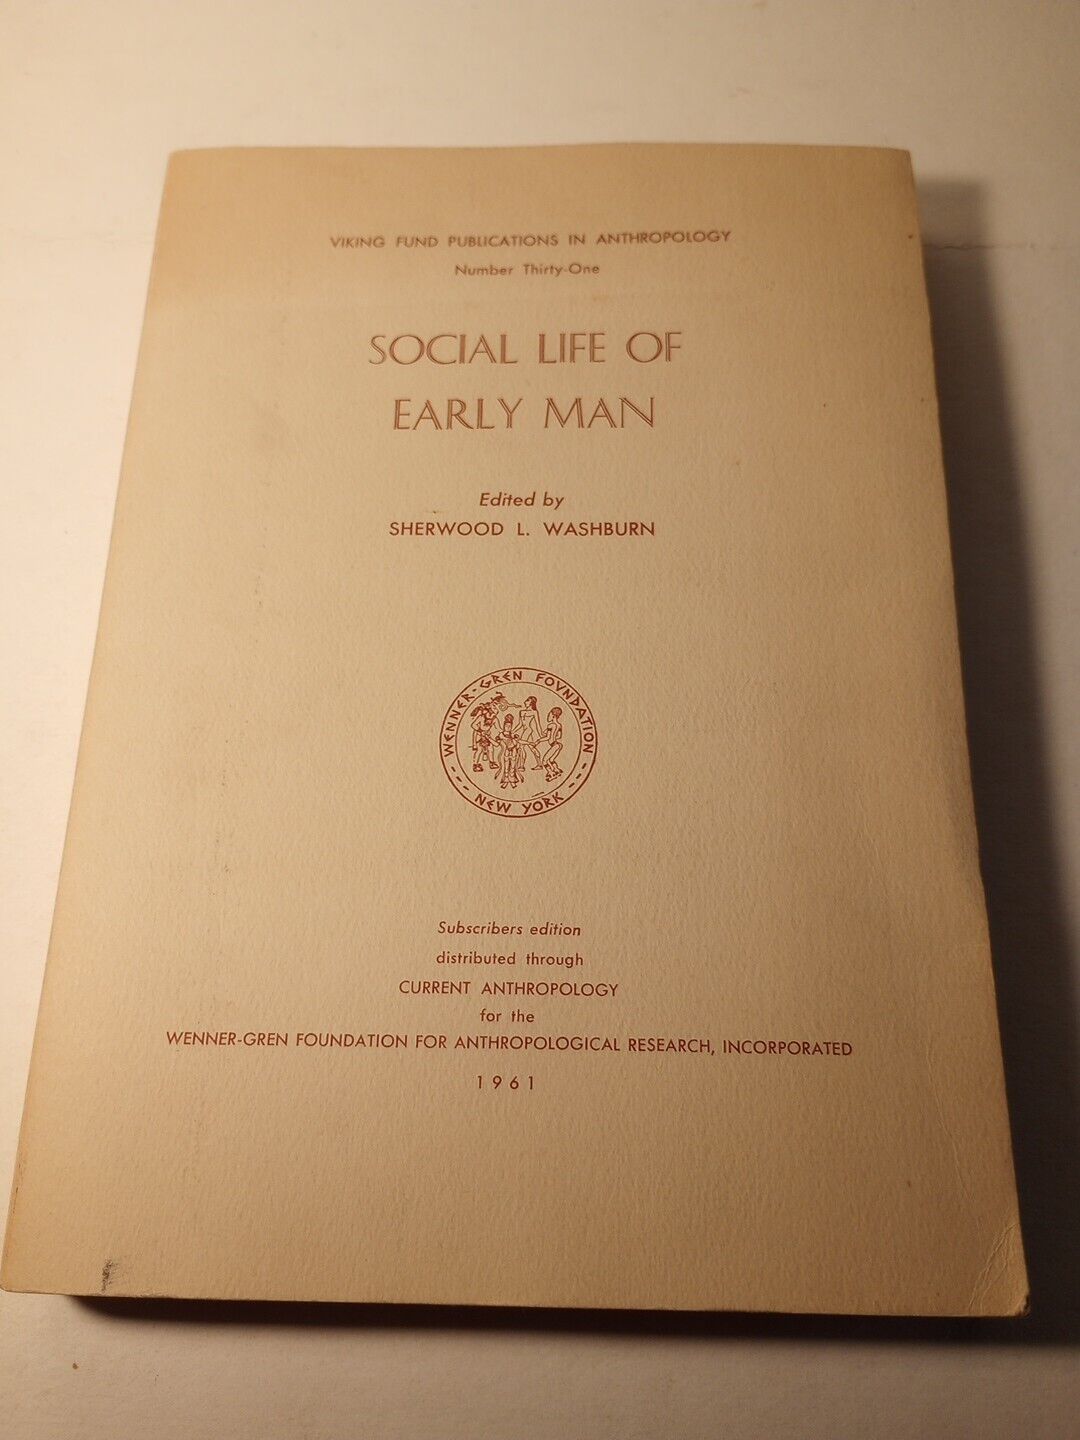 Social life of early man Edited By S.L. Washburn 1961 Wenner-Gren